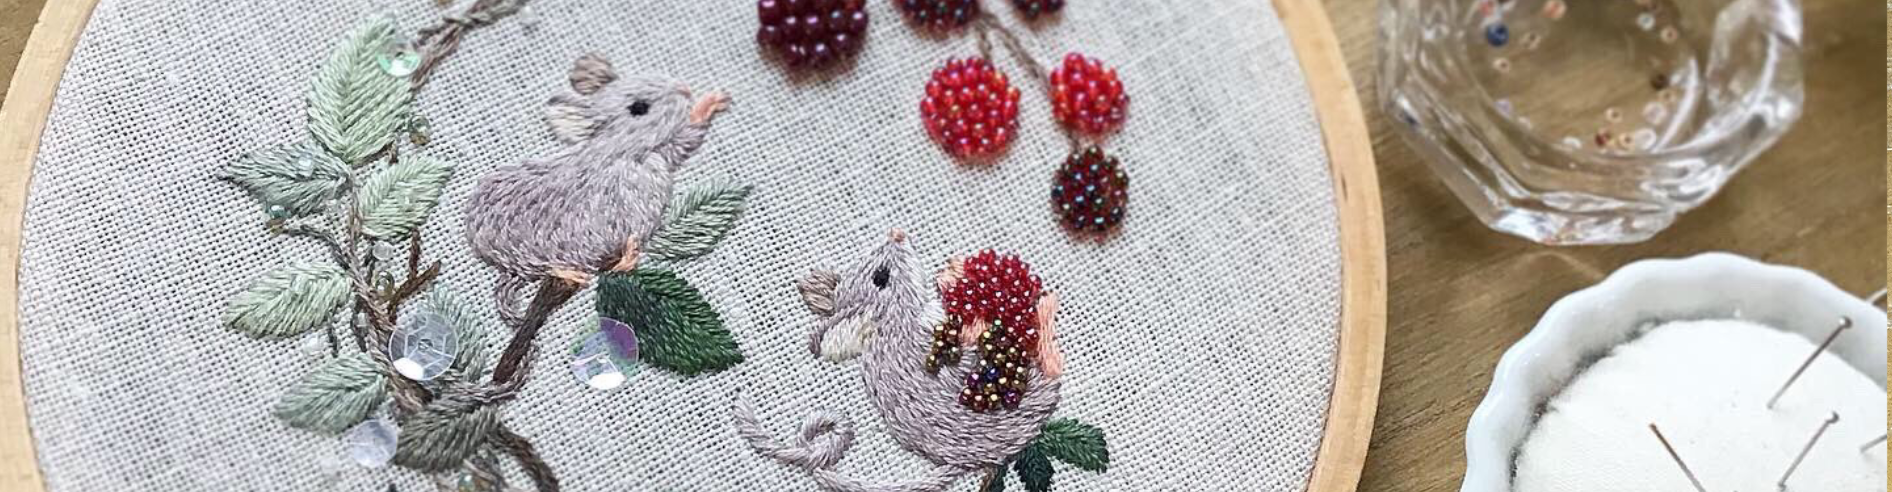 Animal embroidery forum